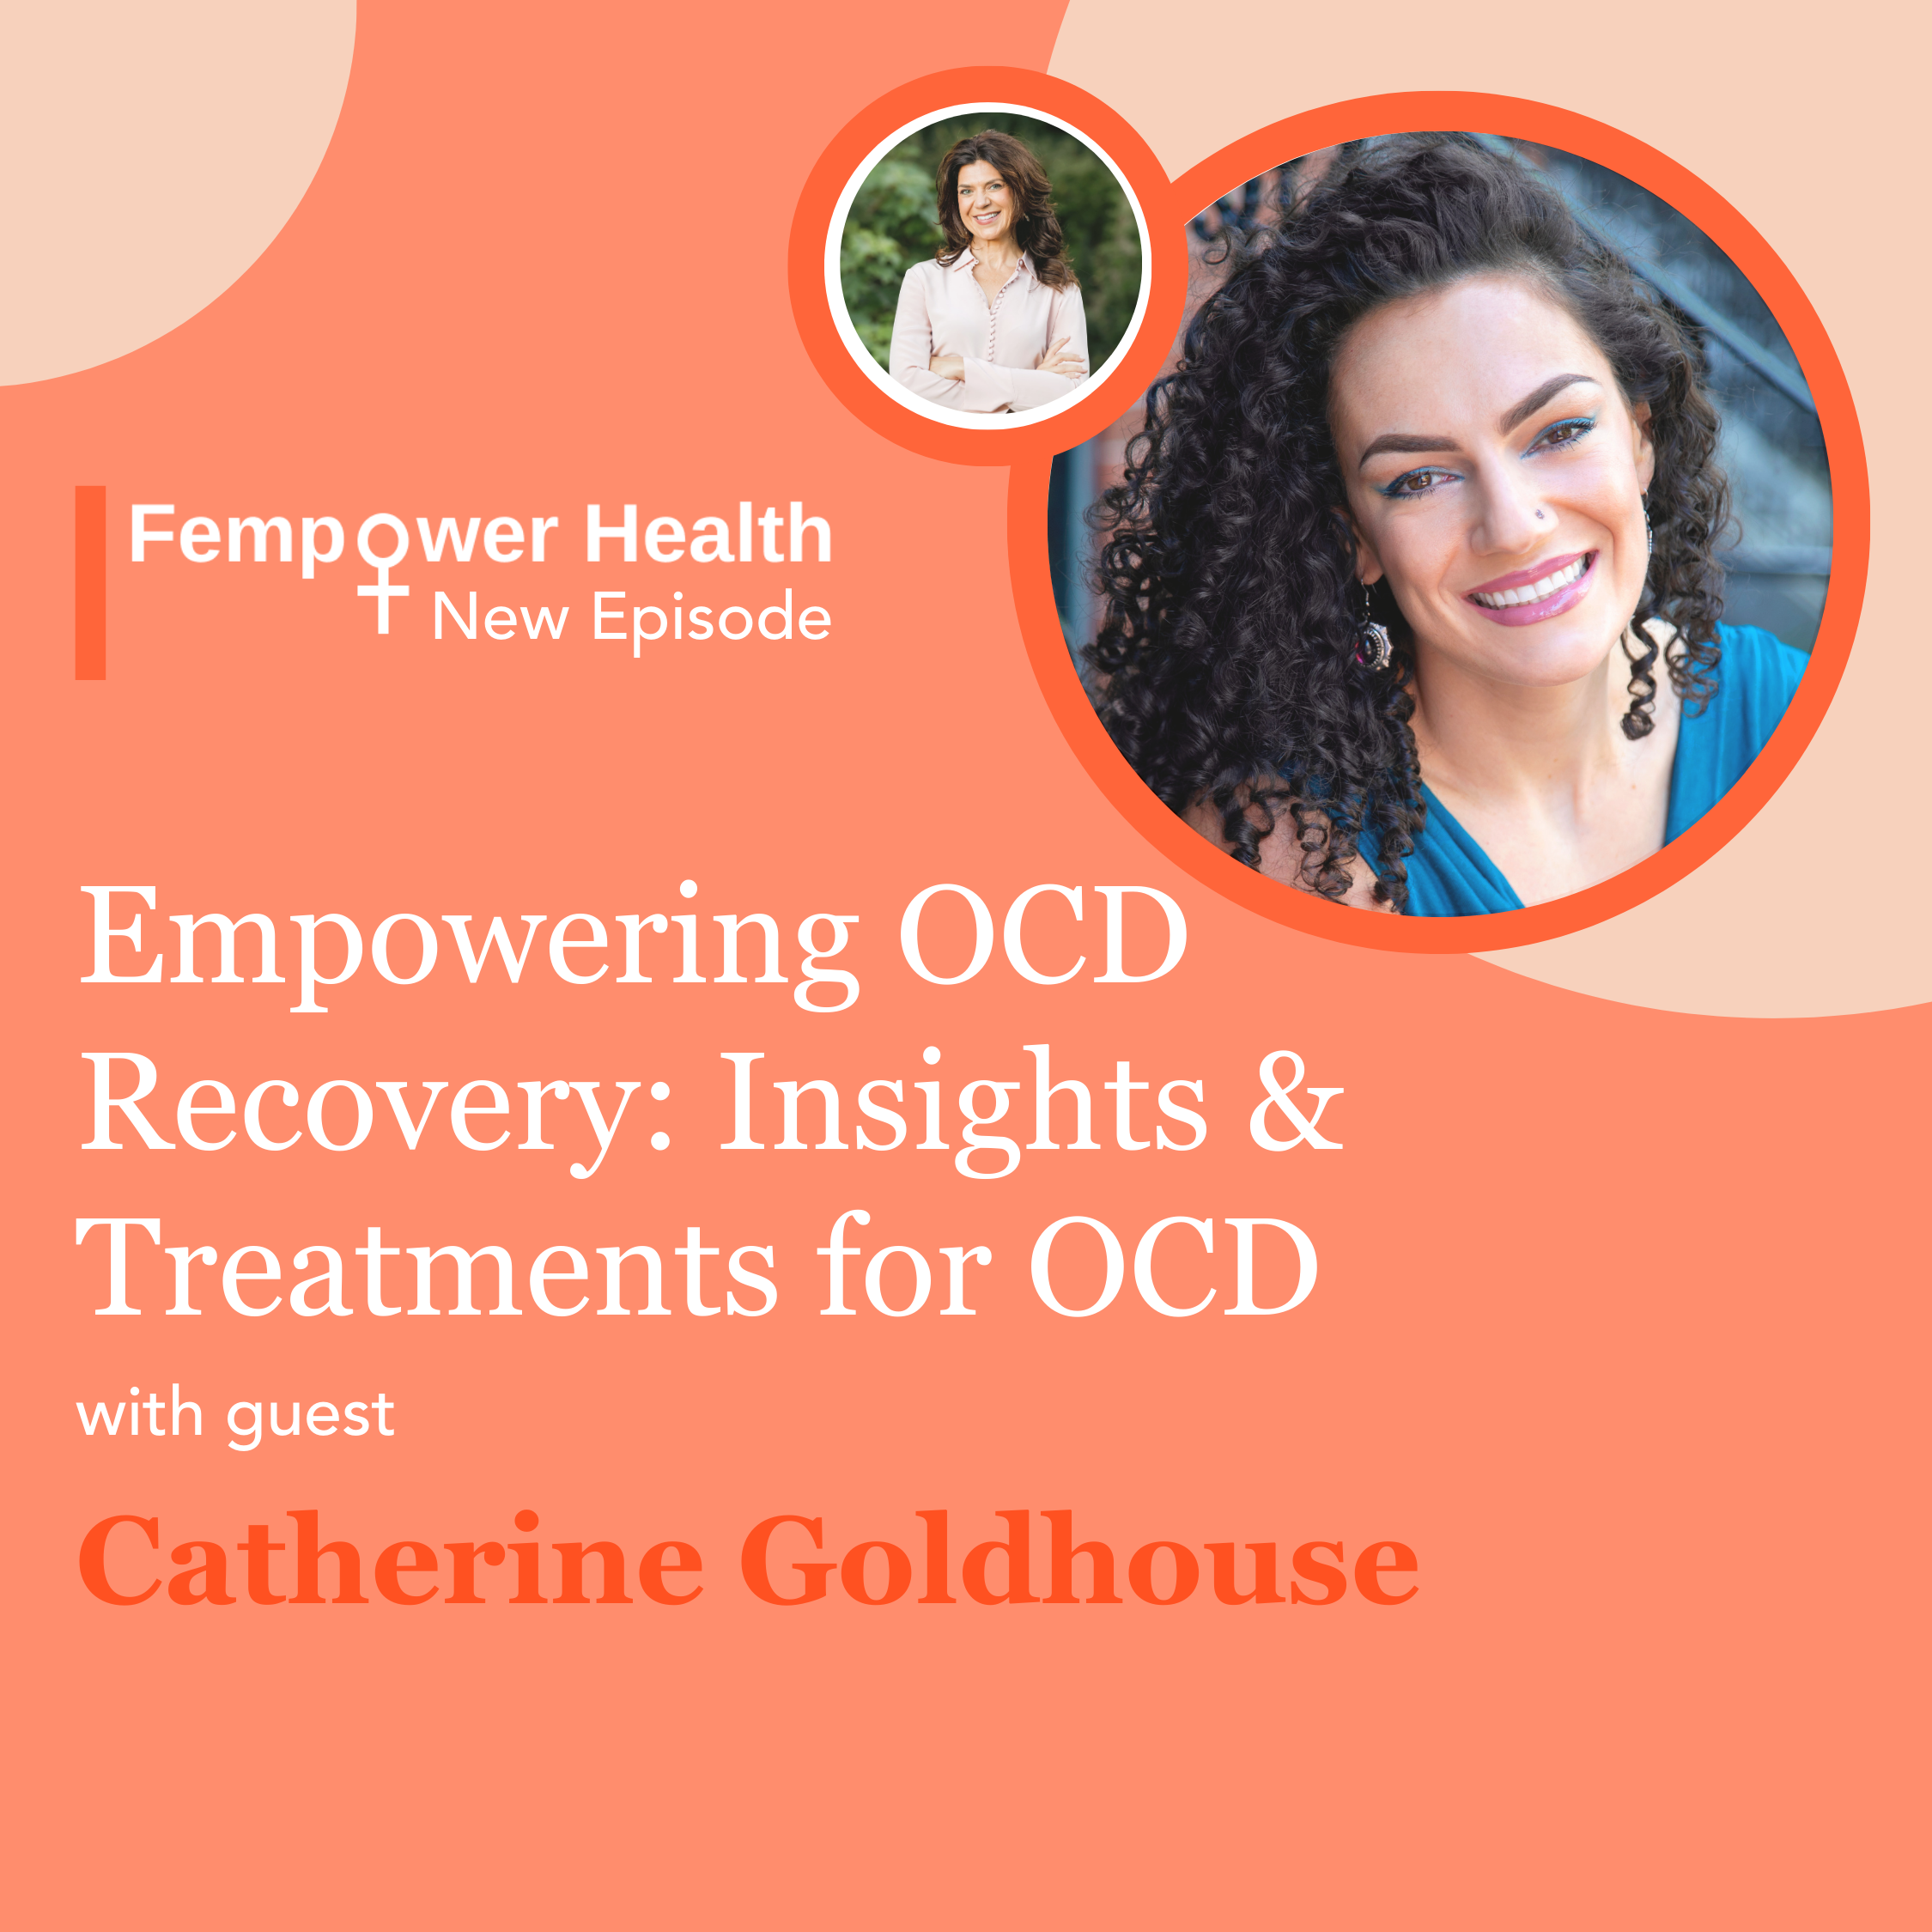 Empowering OCD Recovery: Insights & Treatments for OCD | Catherine Goldhouse